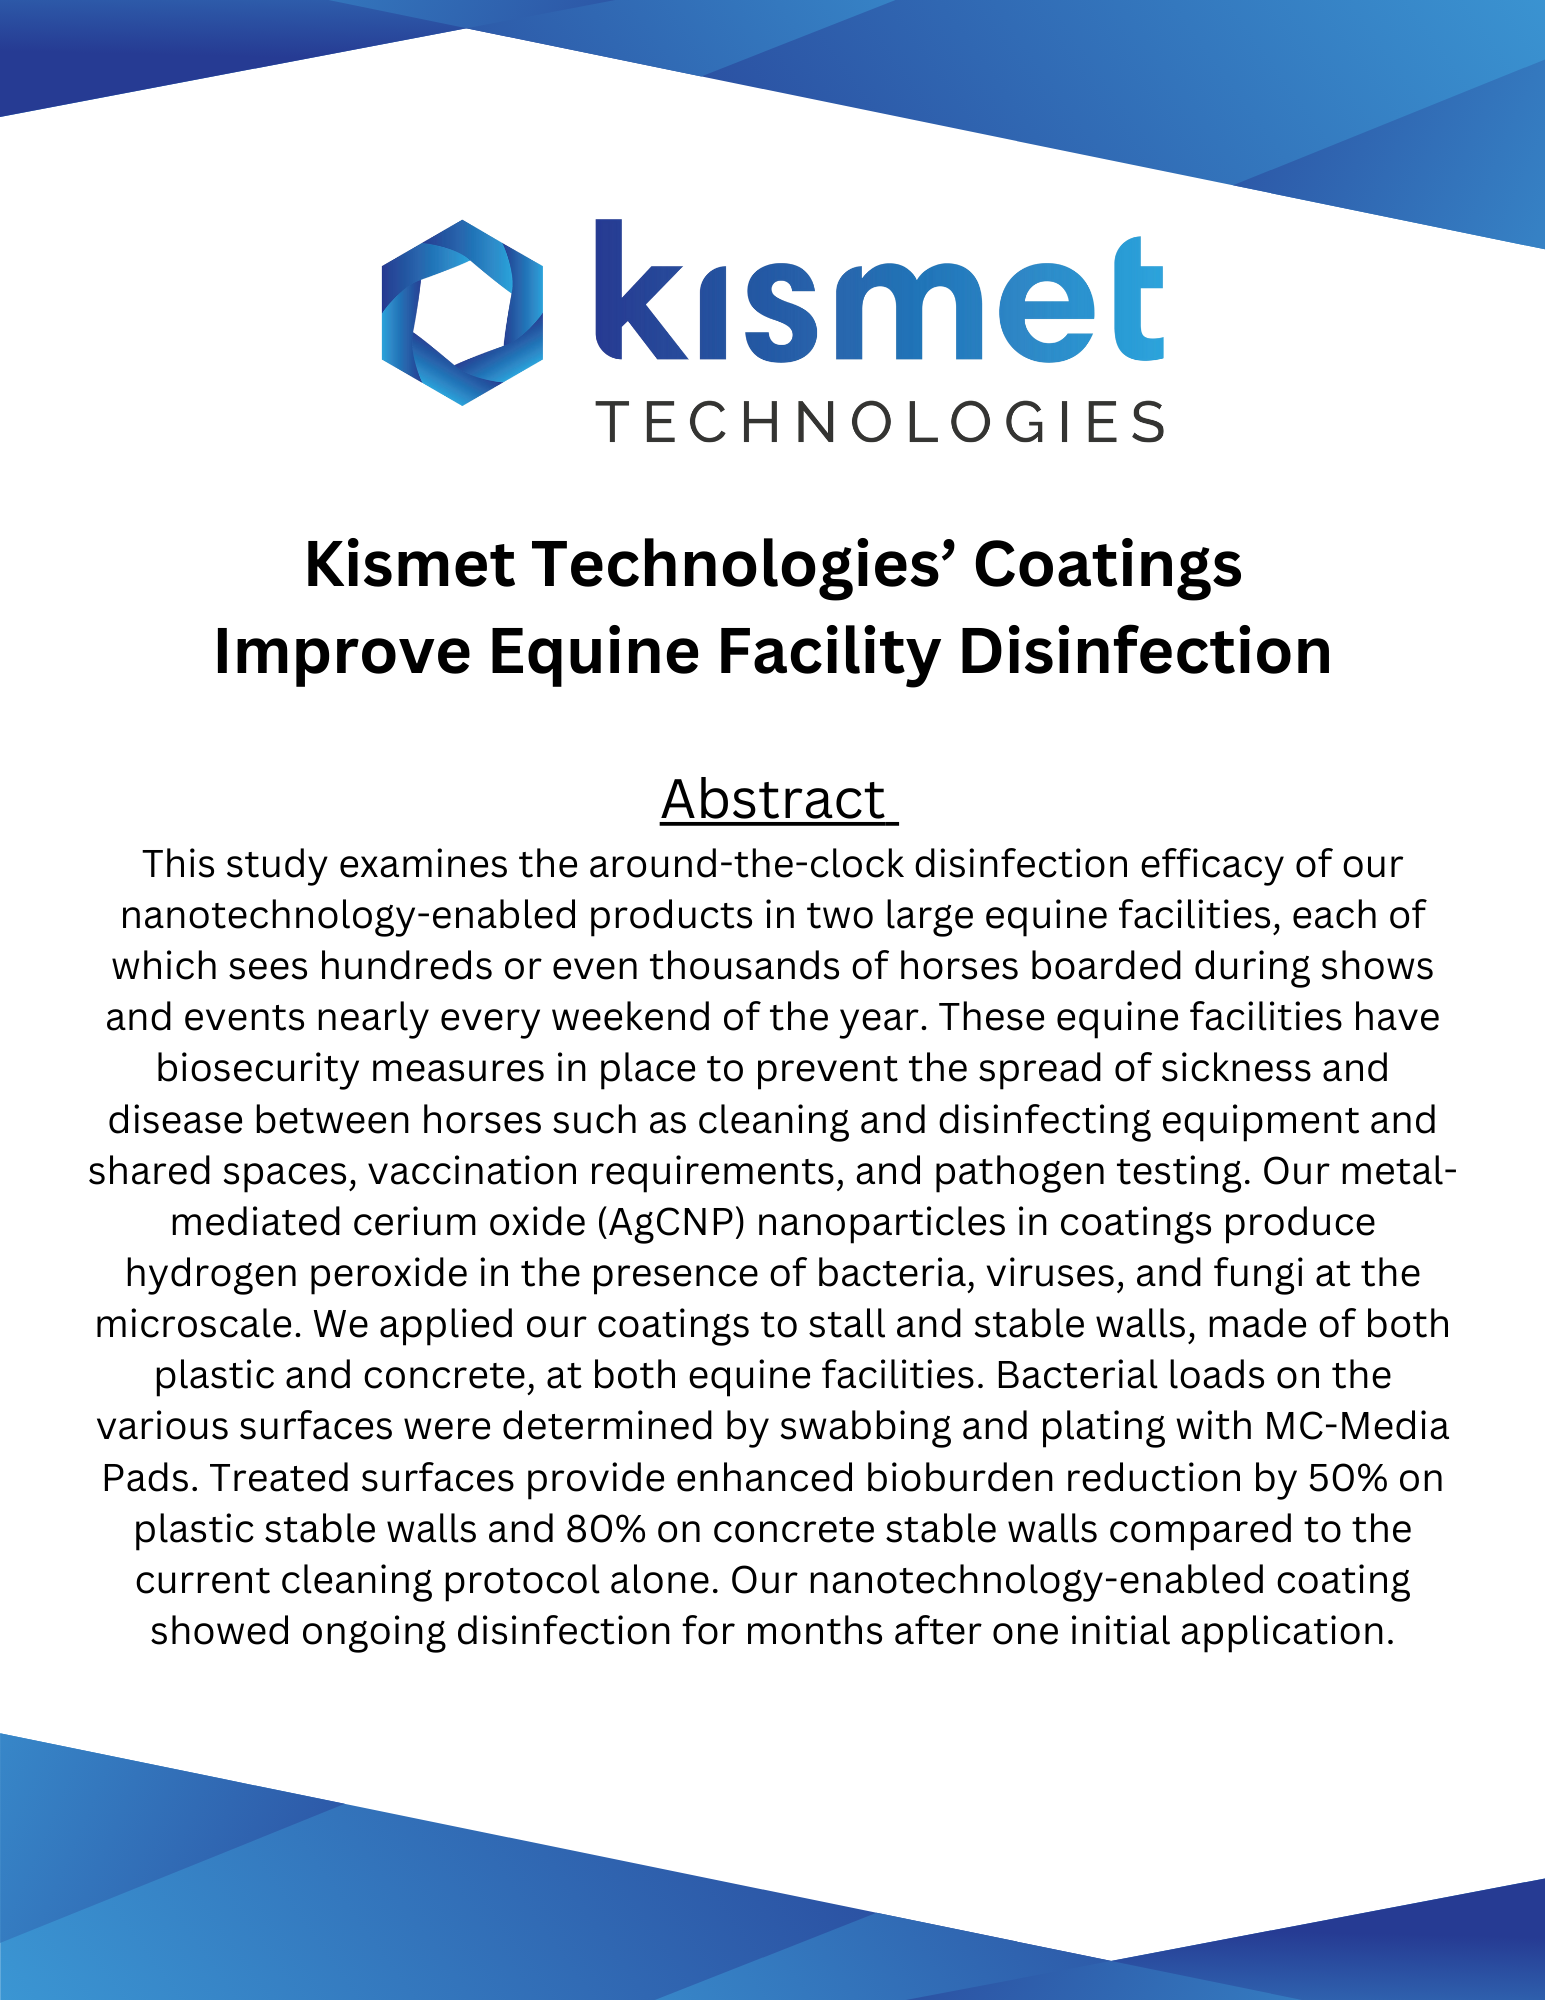 Kismet Technologies’ Coatings Improve Equine Facility Disinfection - Results